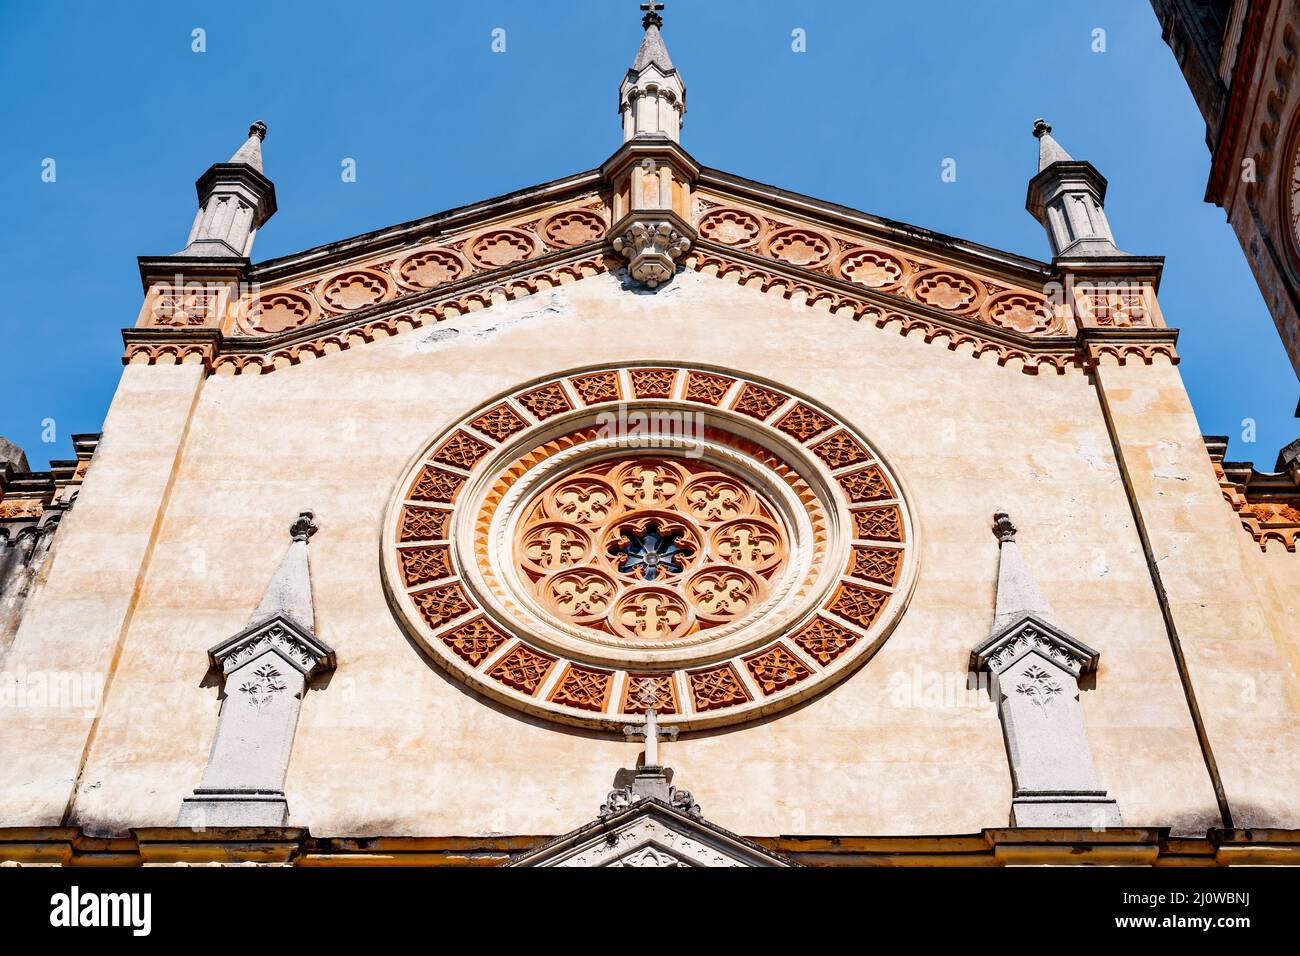 Rose window with floral patterns on the wall of an ancient church Stock Photo